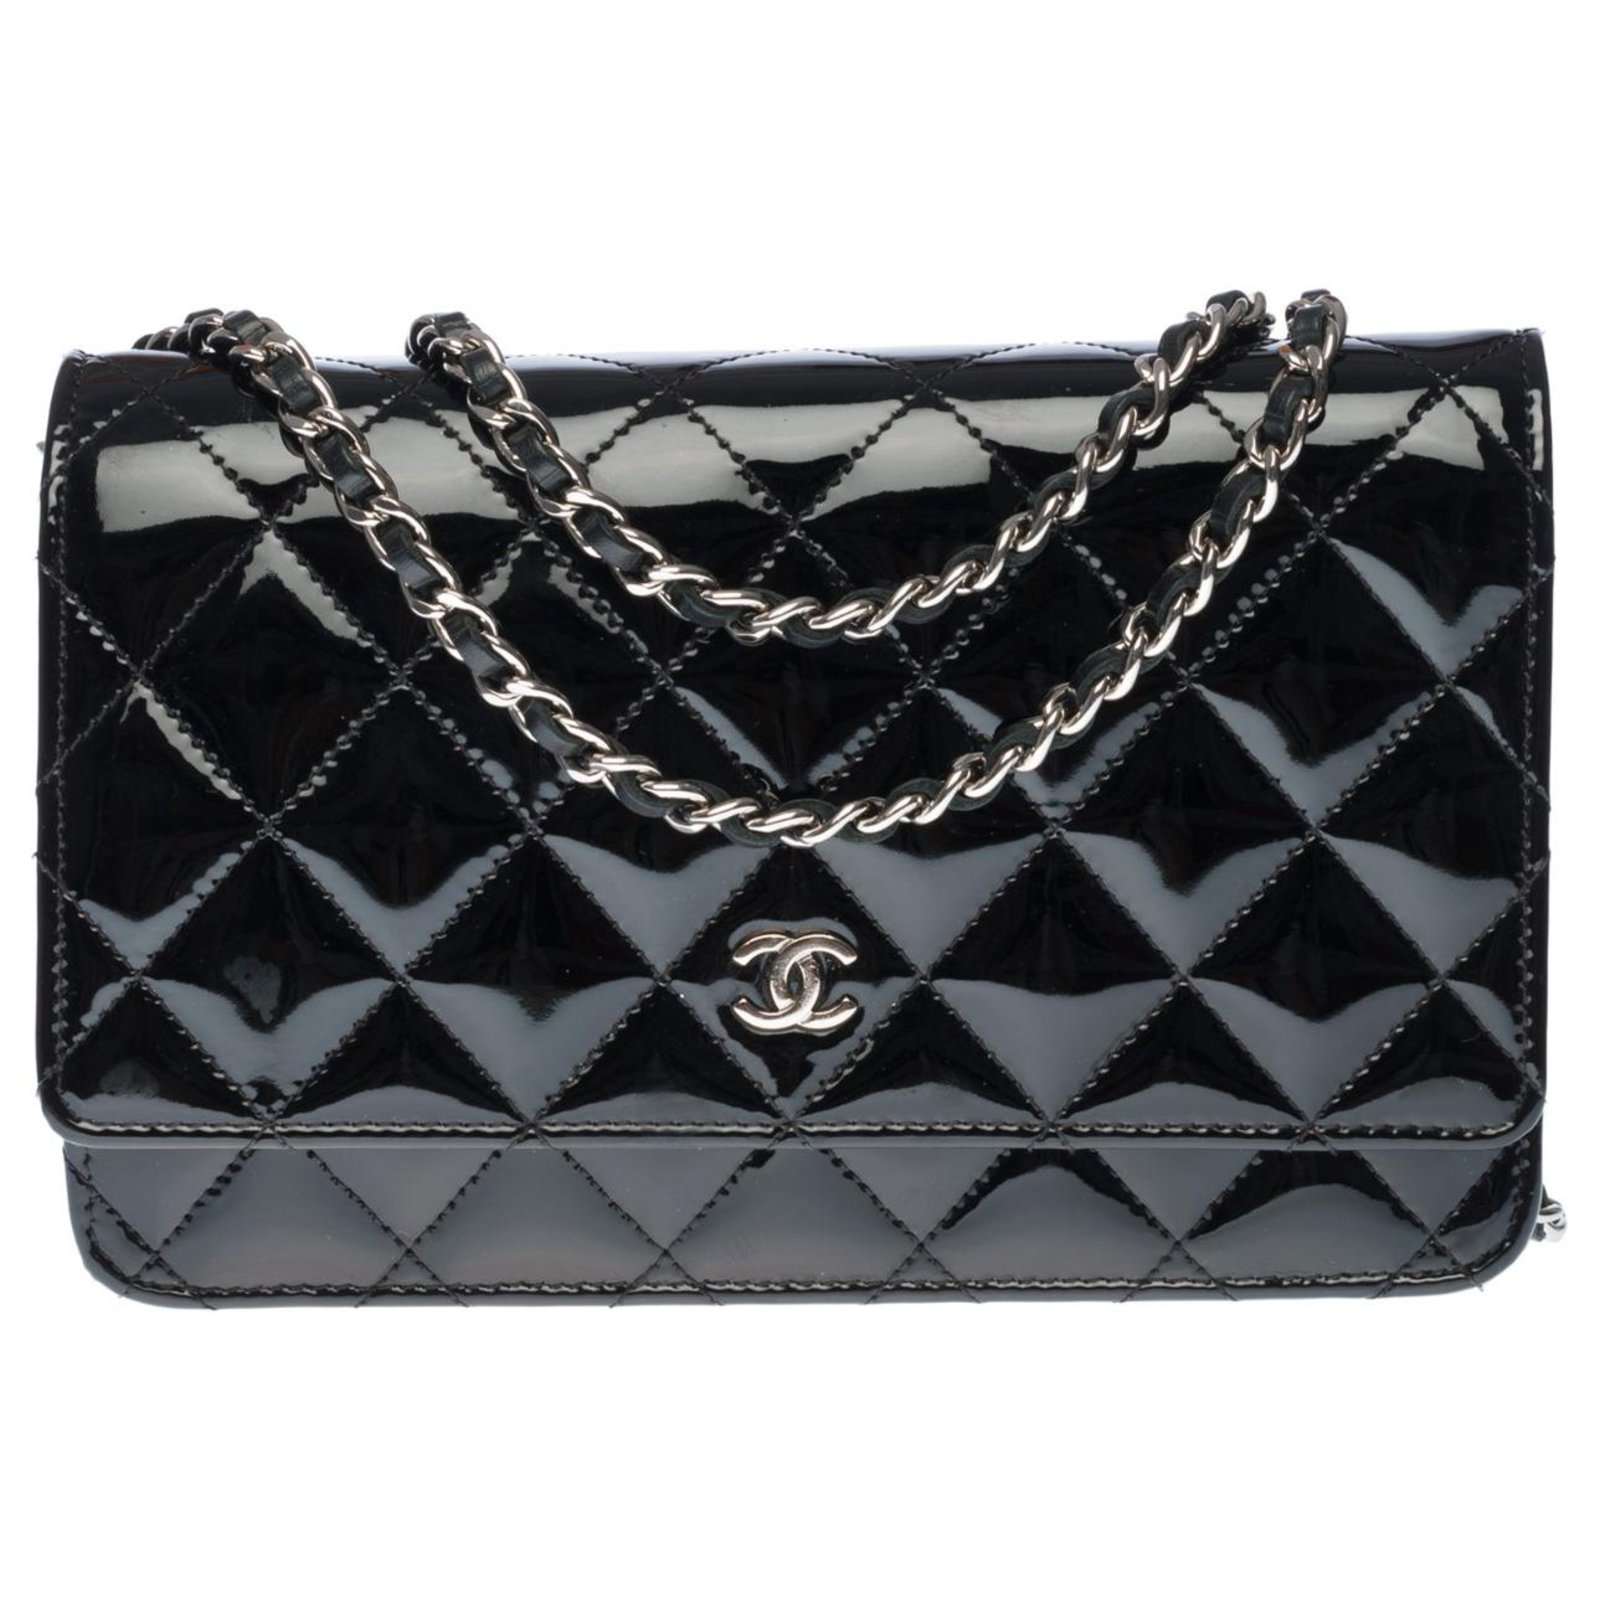 Wallet on chain patent leather crossbody bag Chanel Black in